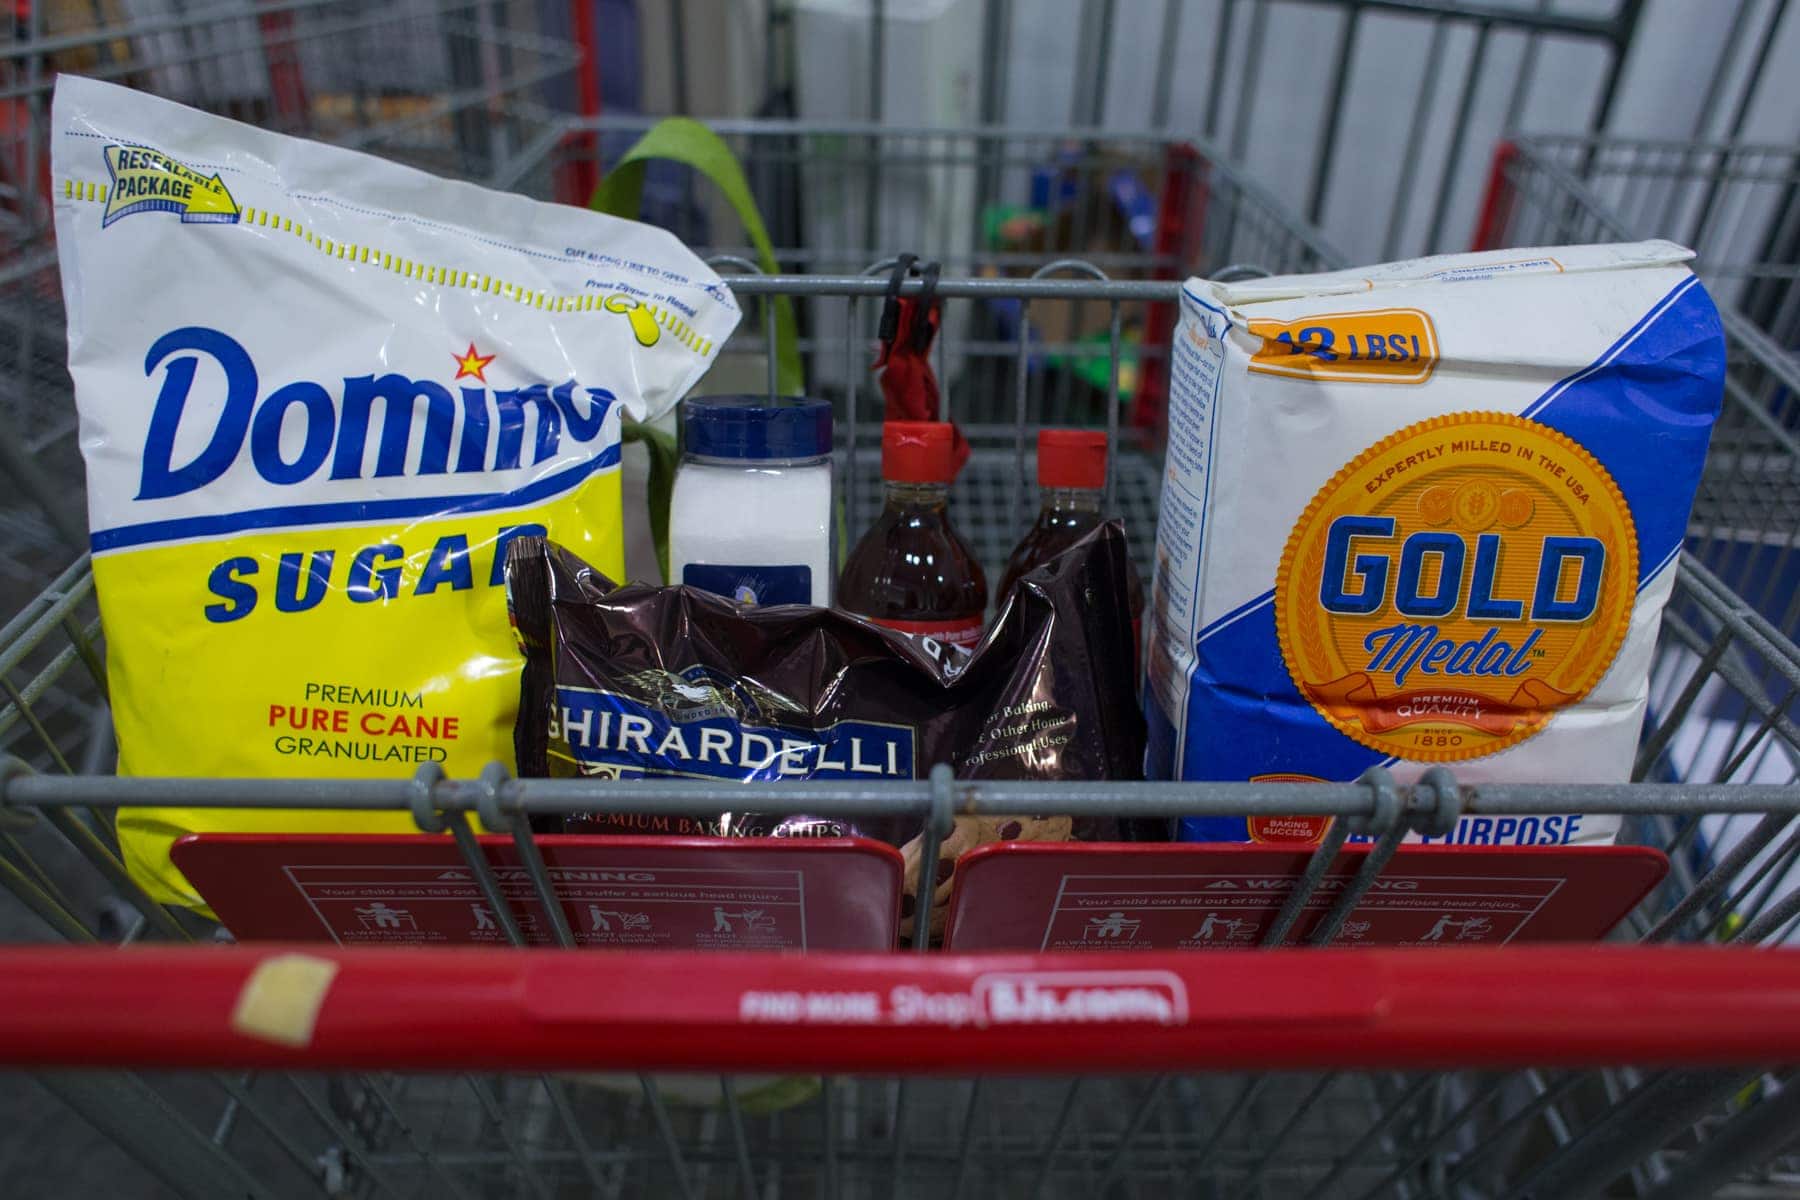 Ingredients in a shopping cart